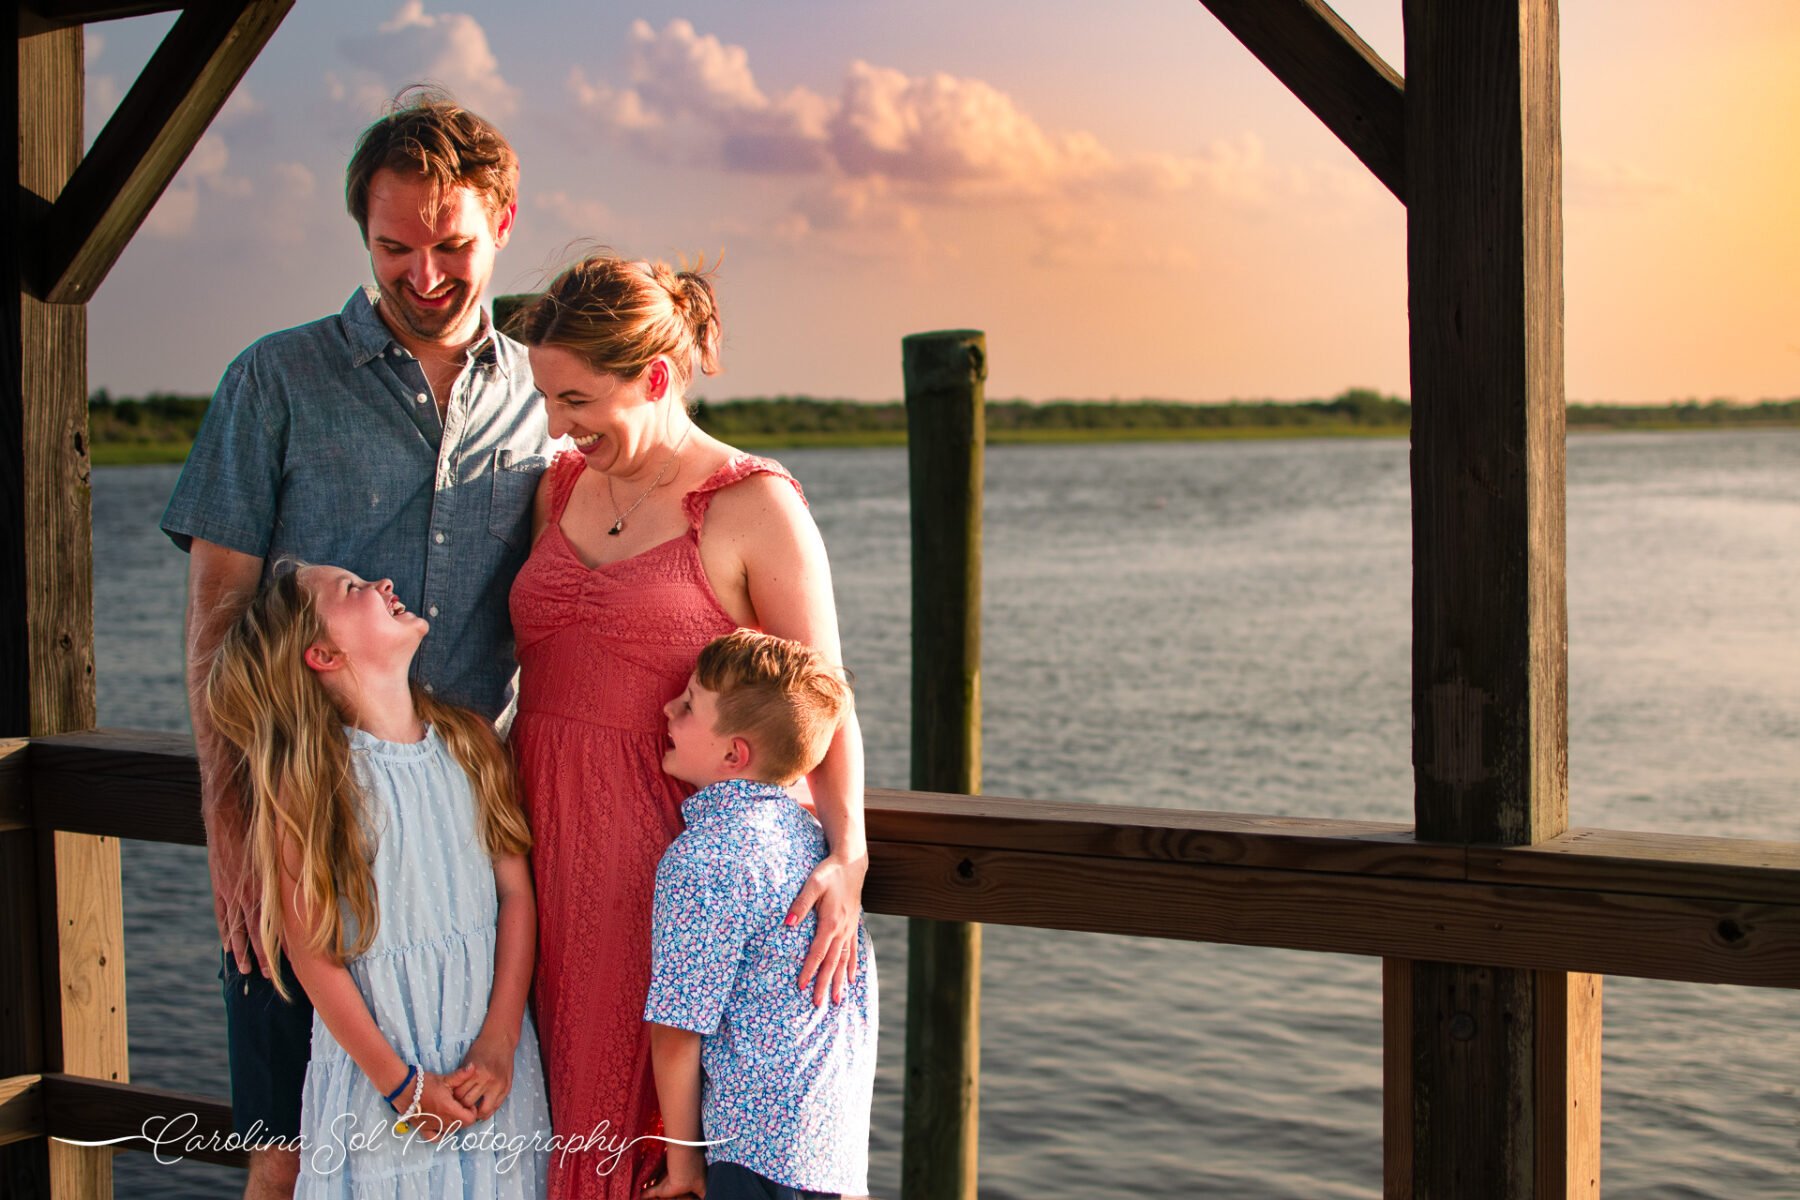 Lifestyle family photography along intracoastal waterway in Sunset Beach, NC.